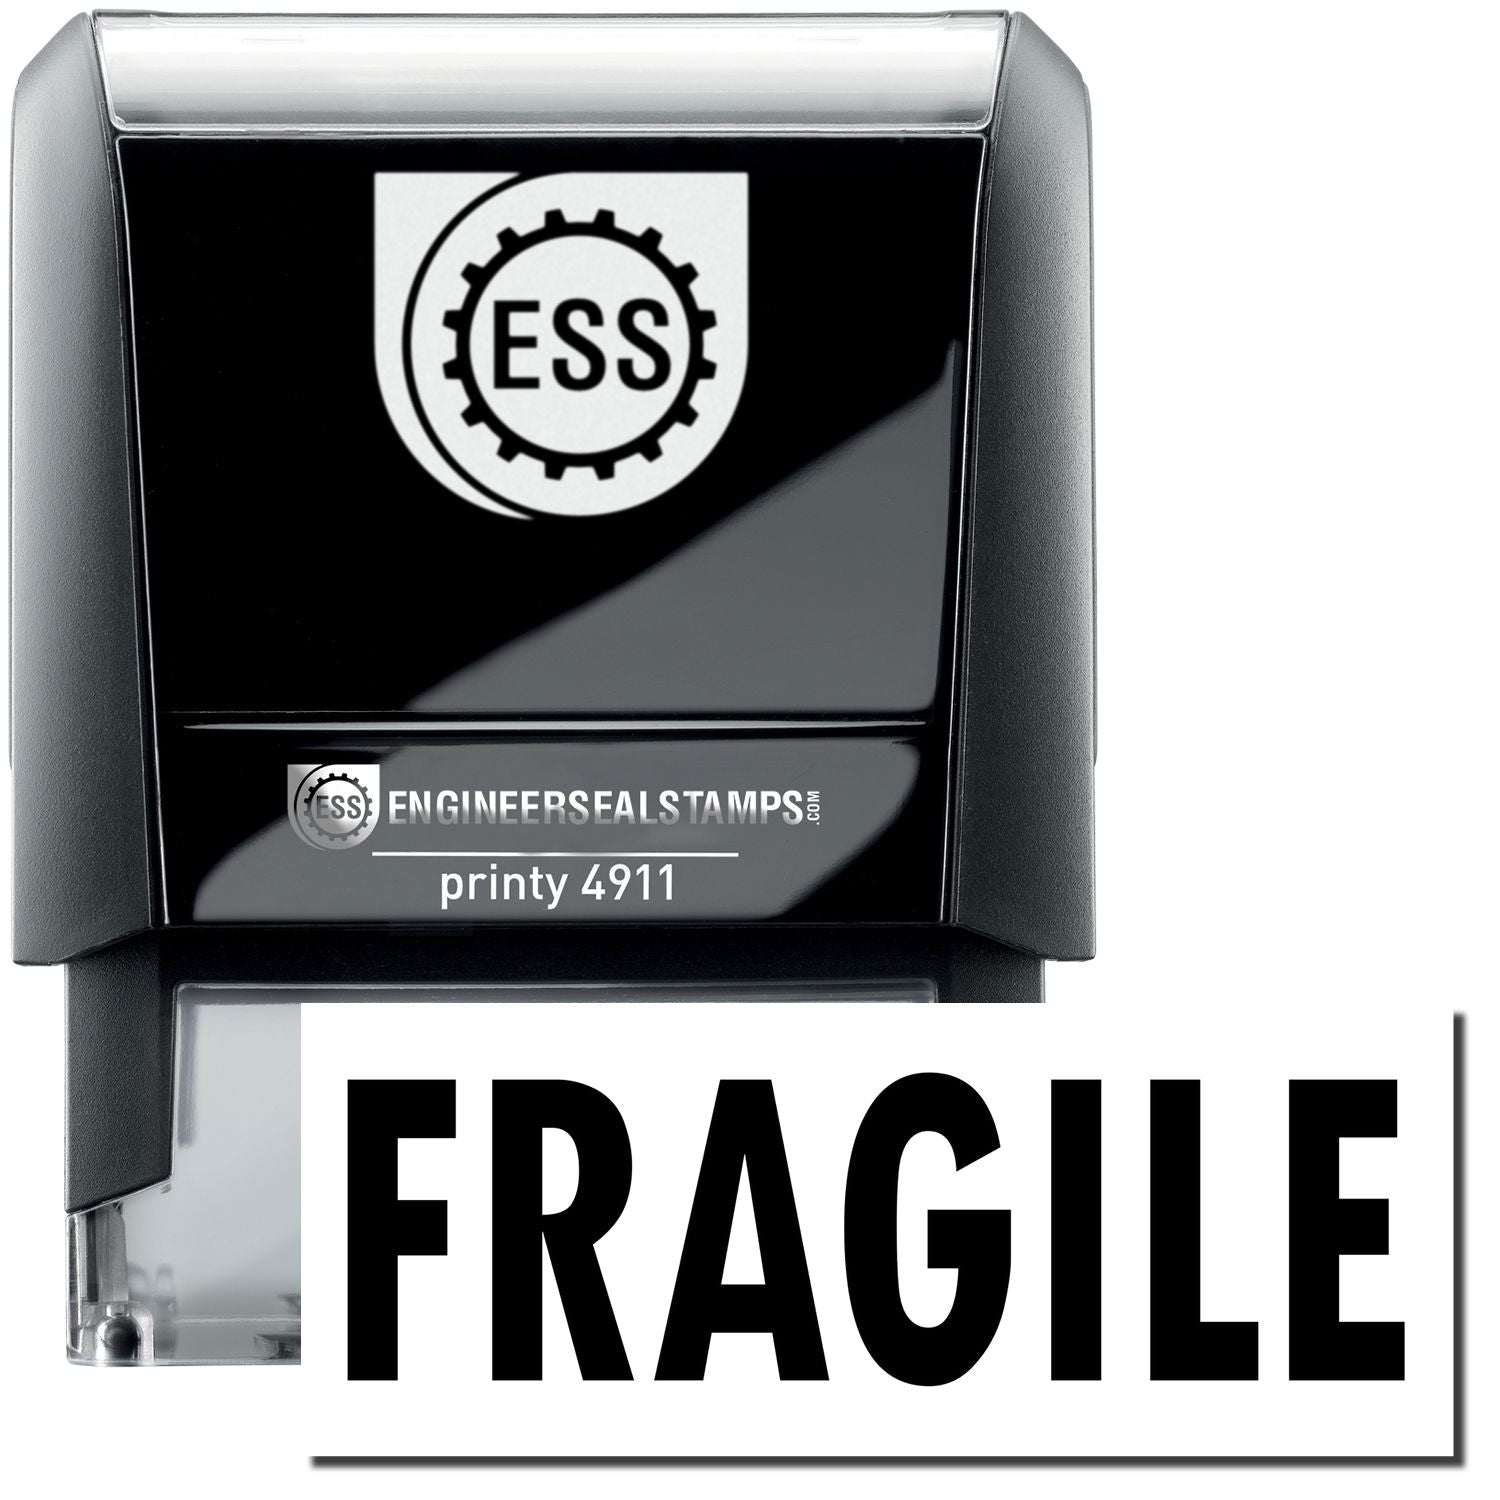 A self-inking stamp with a stamped image showing how the text "FRAGILE" is displayed after stamping.